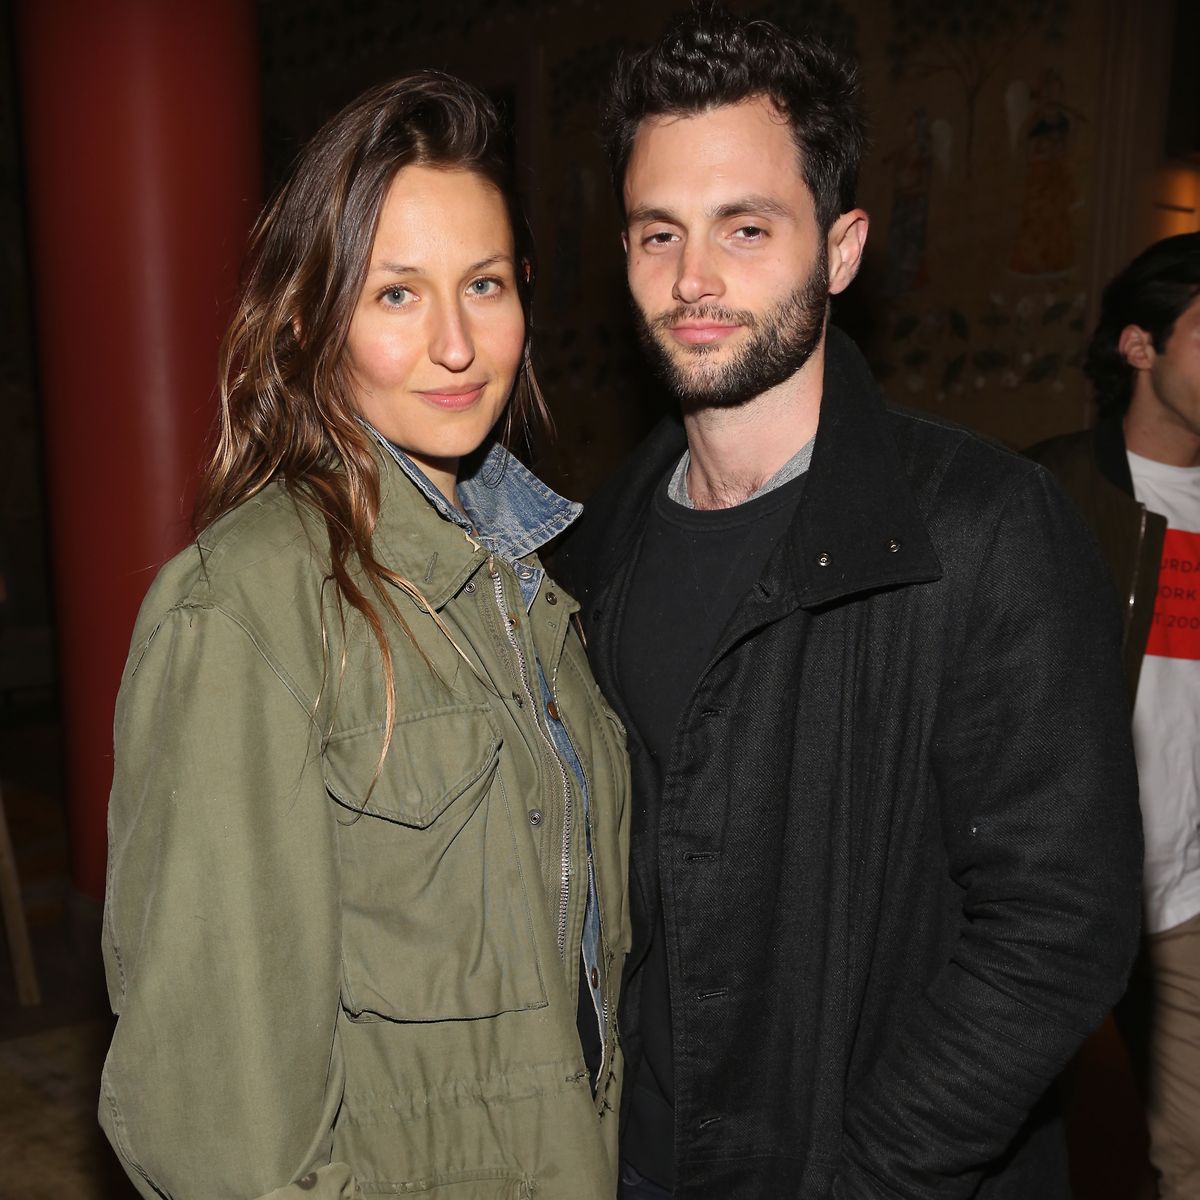 Know About Penn Badgley's Wife And Kids!